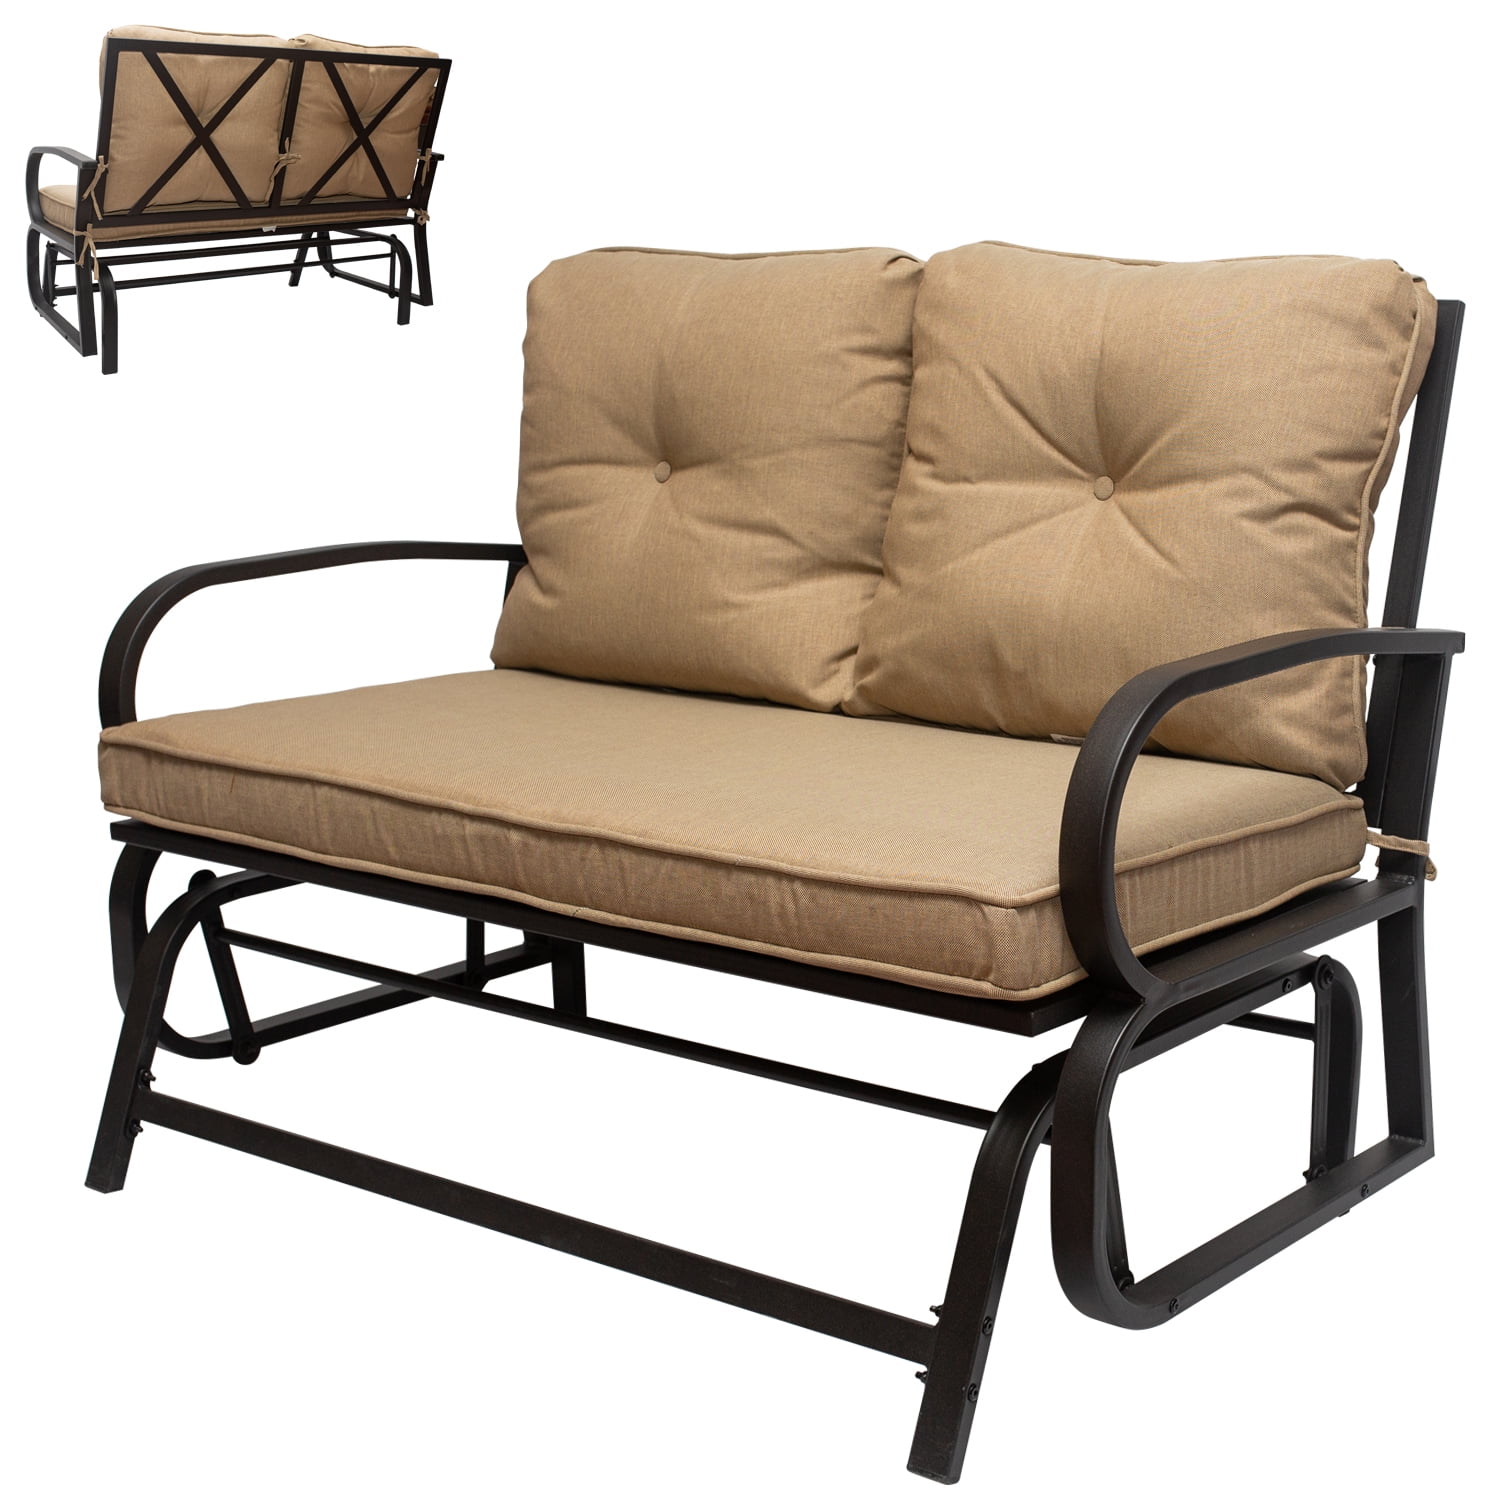 2 Person Rocking Seating Patio Swing Chair,Outdoor Swing Glider Rocking Chair Patio Bench Garden Loveseat Seating Patio Steel Frame Chair Set with Cushion Beige Patio Glider Bench Loveseat 